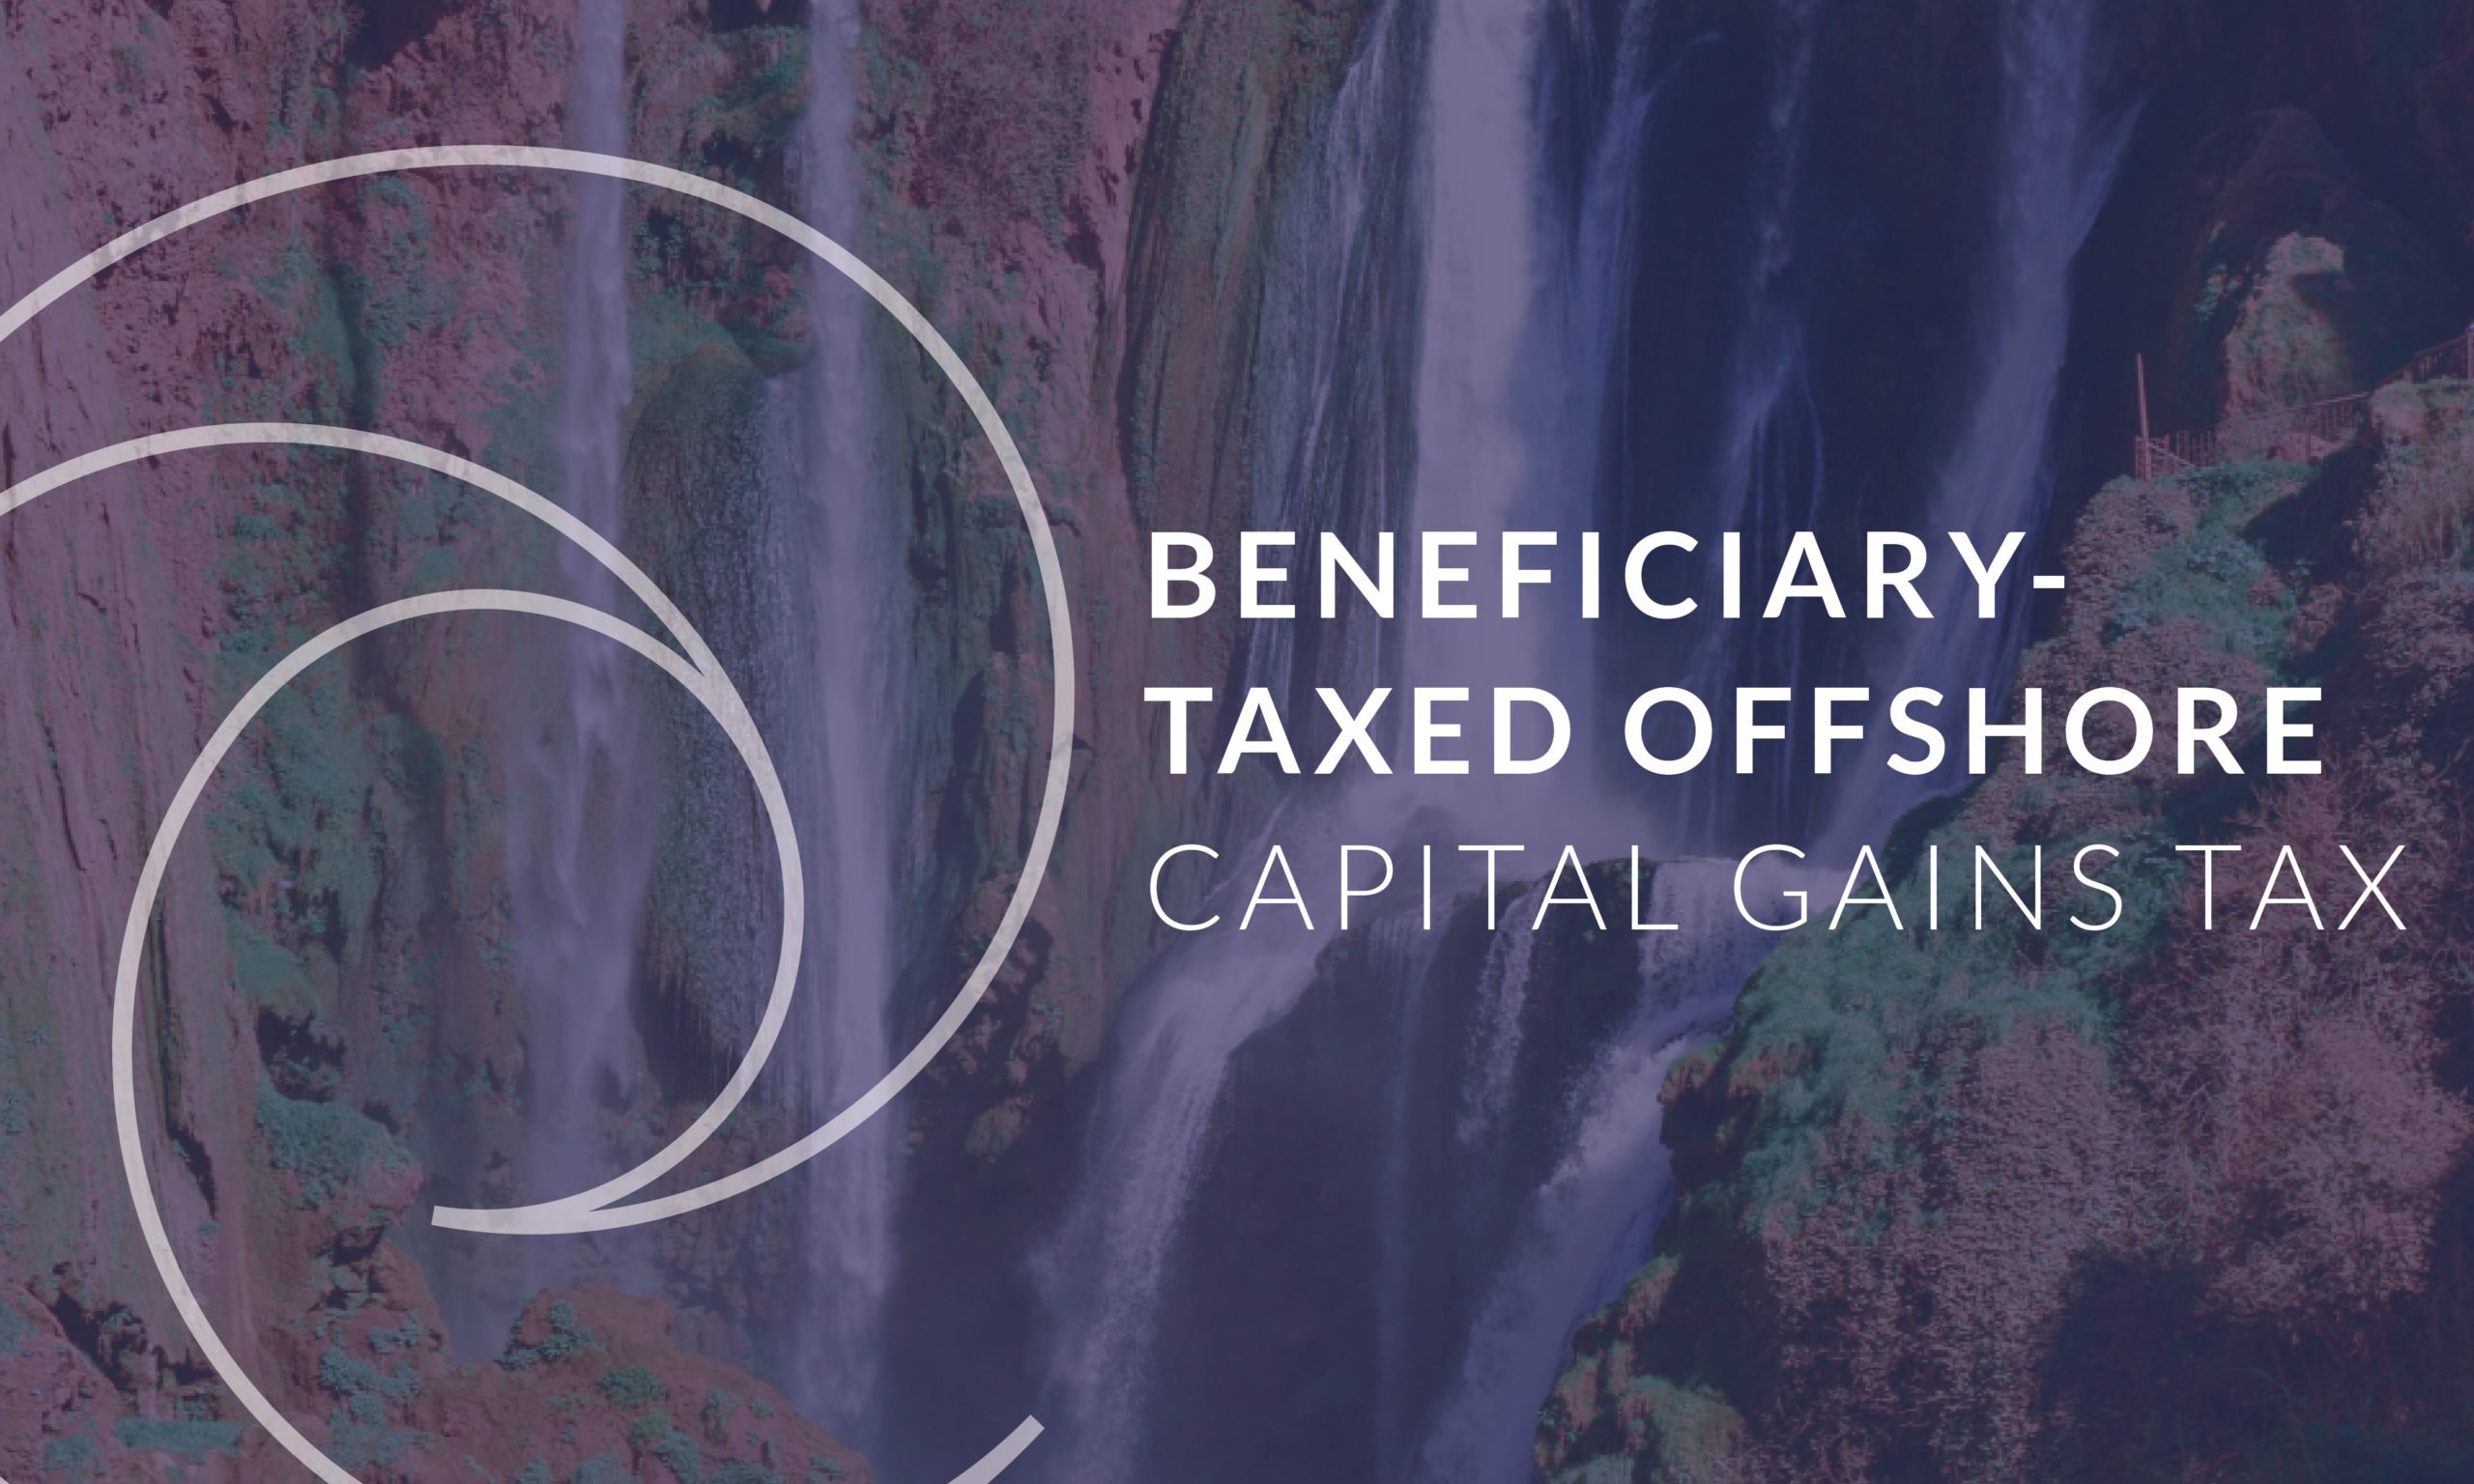 Capital Gains Tax on Beneficiary-Taxed Offshore Trusts